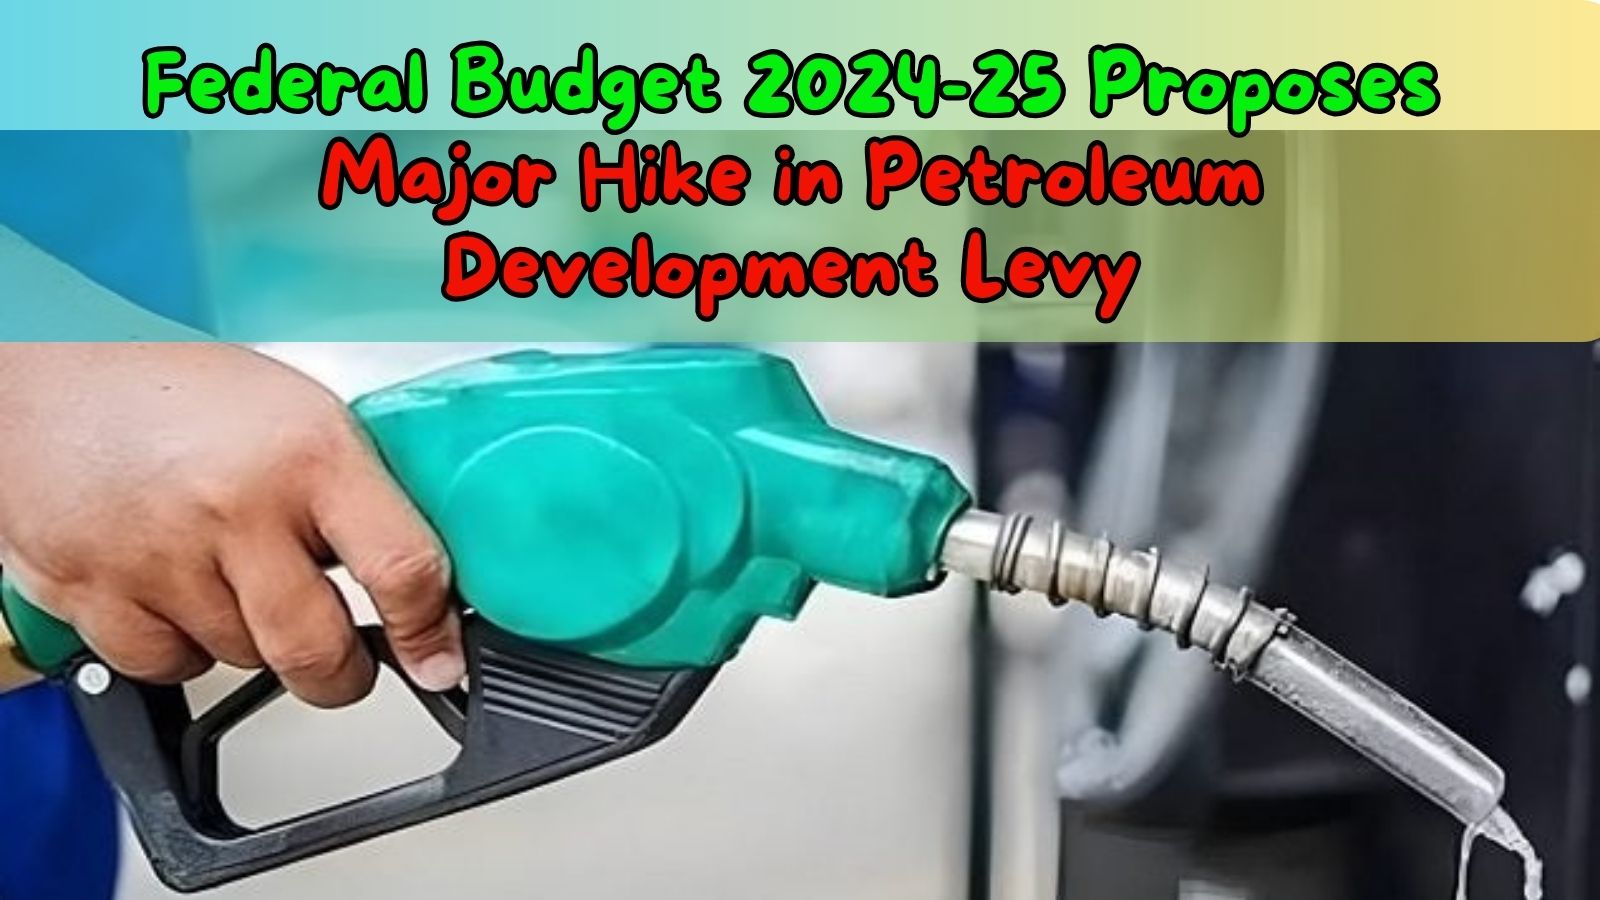 Federal Budget 2024-25 Proposes Major Hike in Petroleum Development Levy